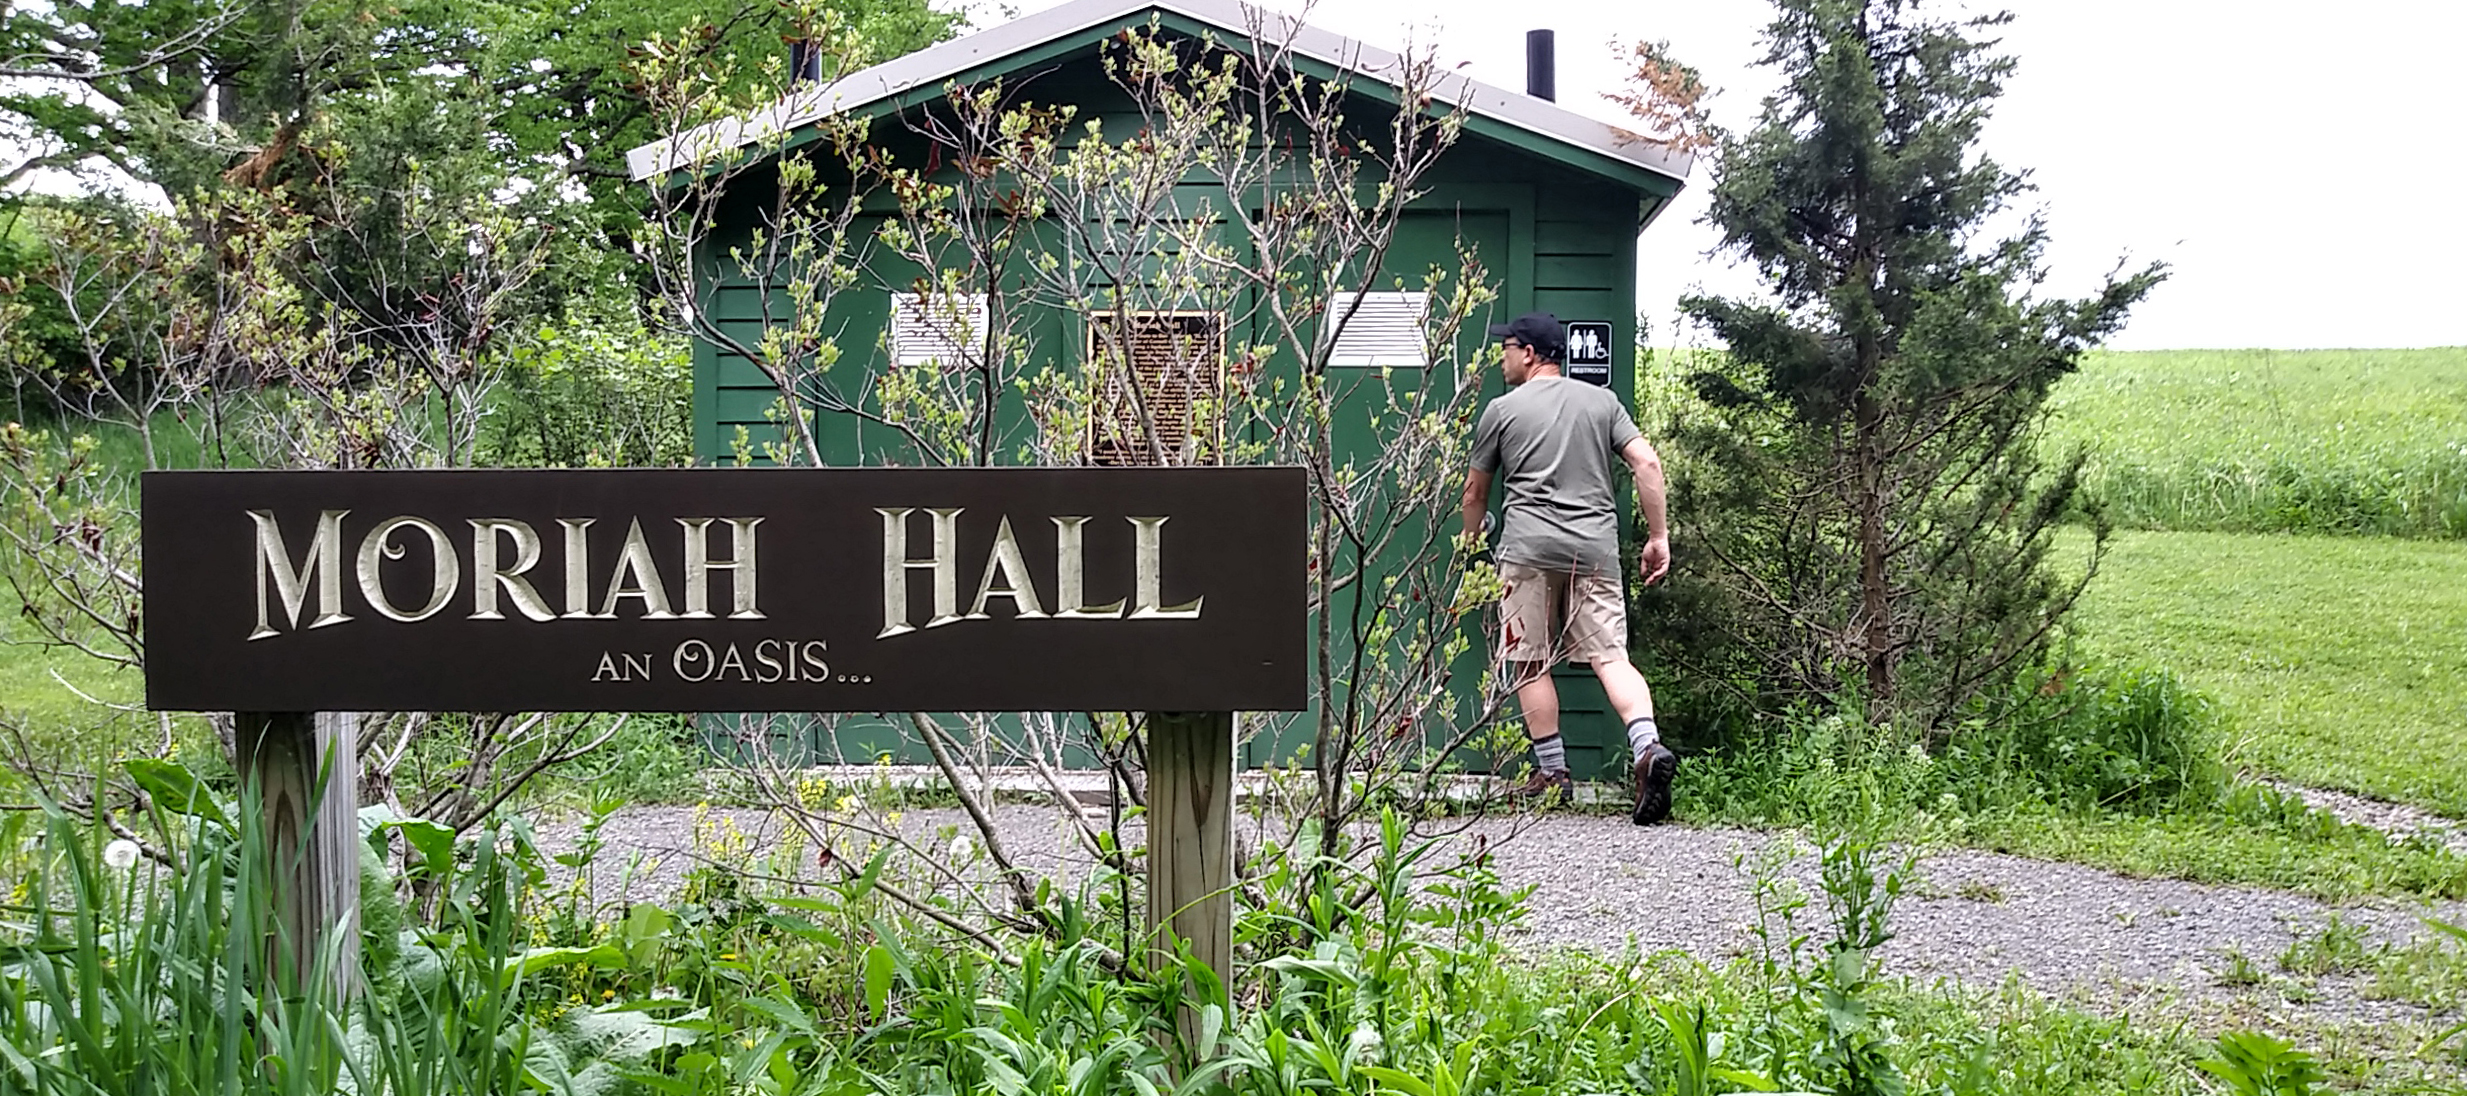 Relief can be had at Moriah Hall, the composting toilet facilities at the Hoffman Challenge Course